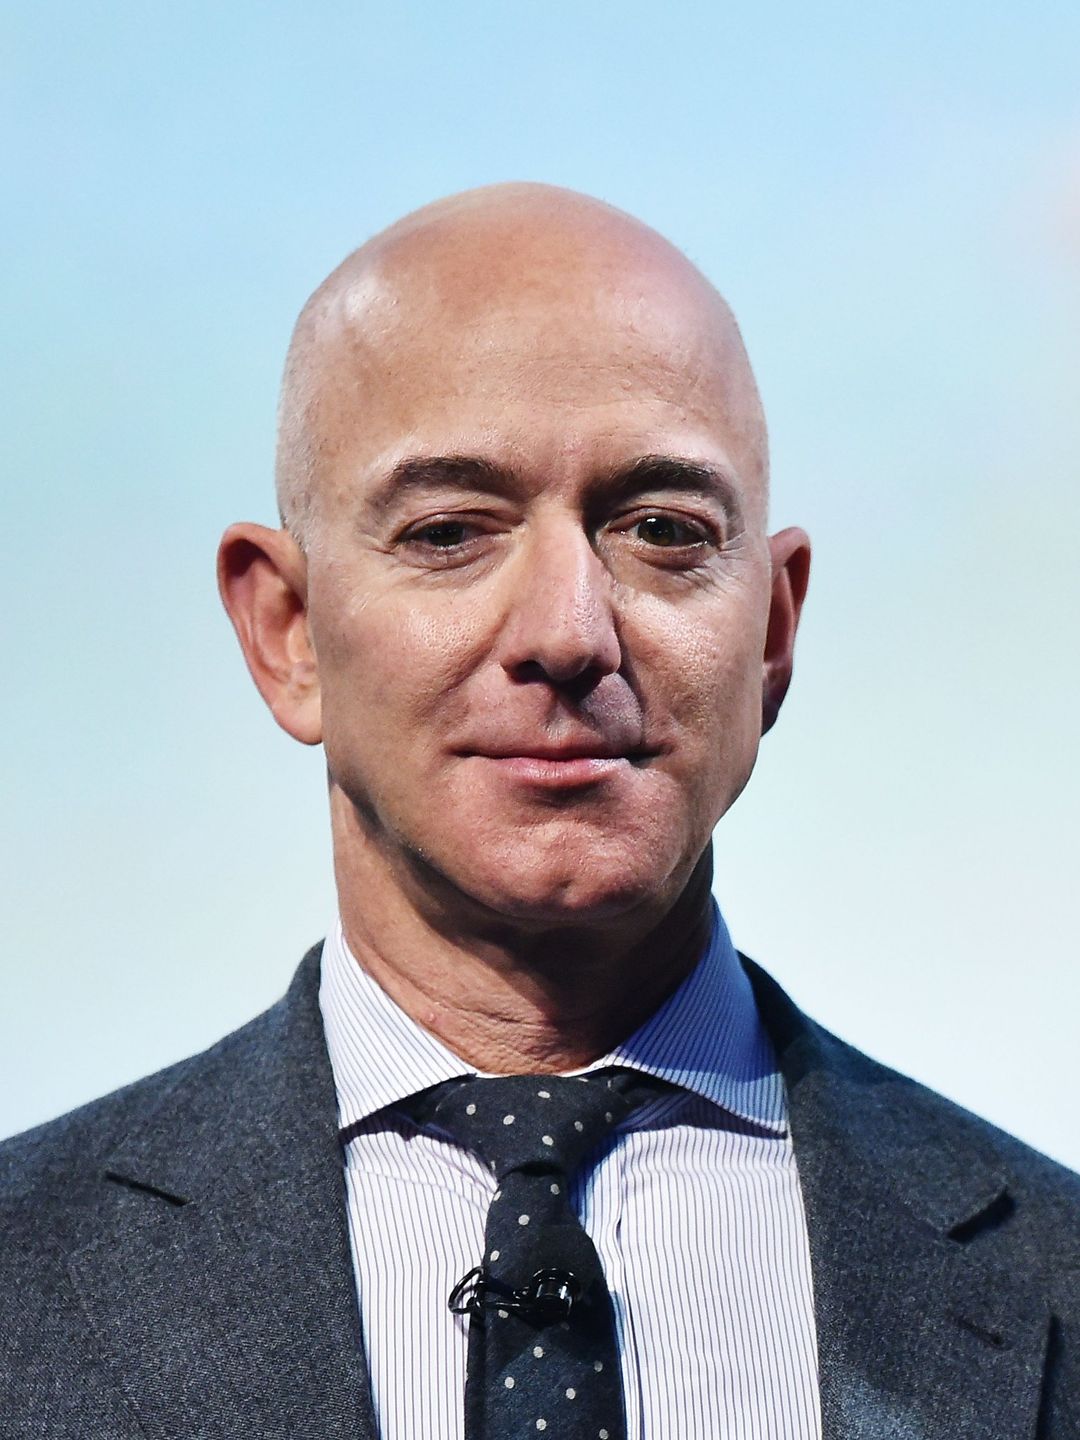 Jeff Bezos does he have a wife